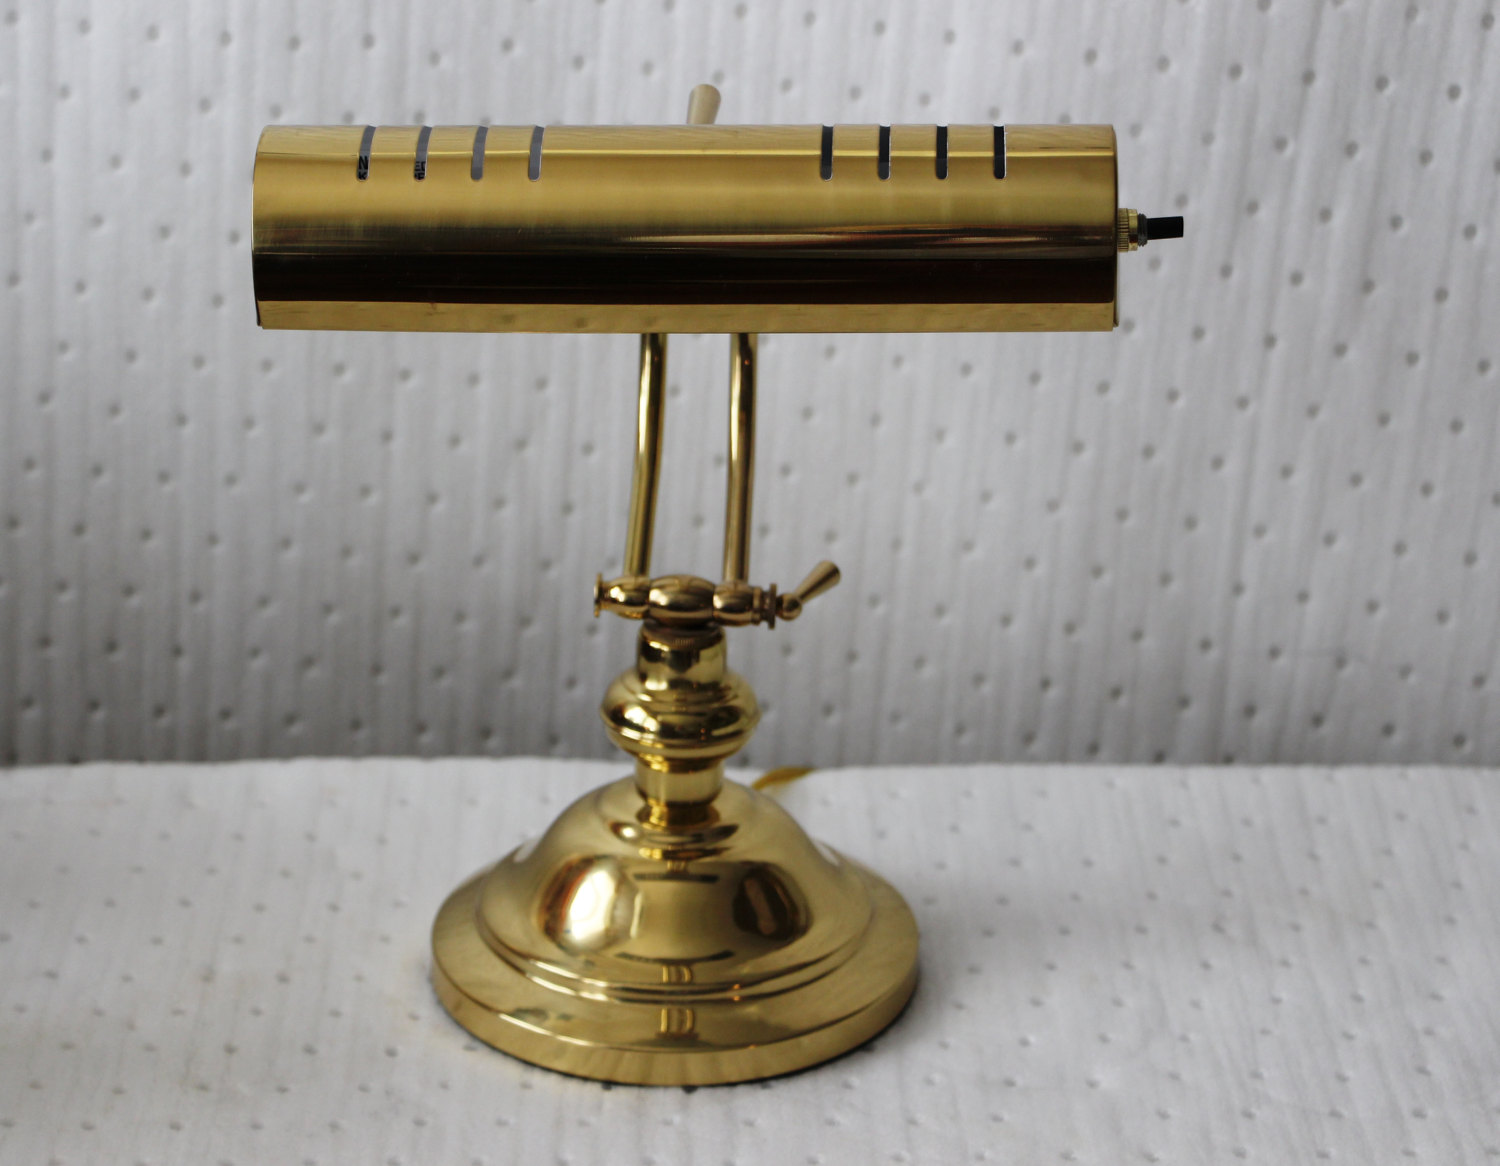 Antique Brass Desk Lamp Offers A Dignified Friendly Look In The